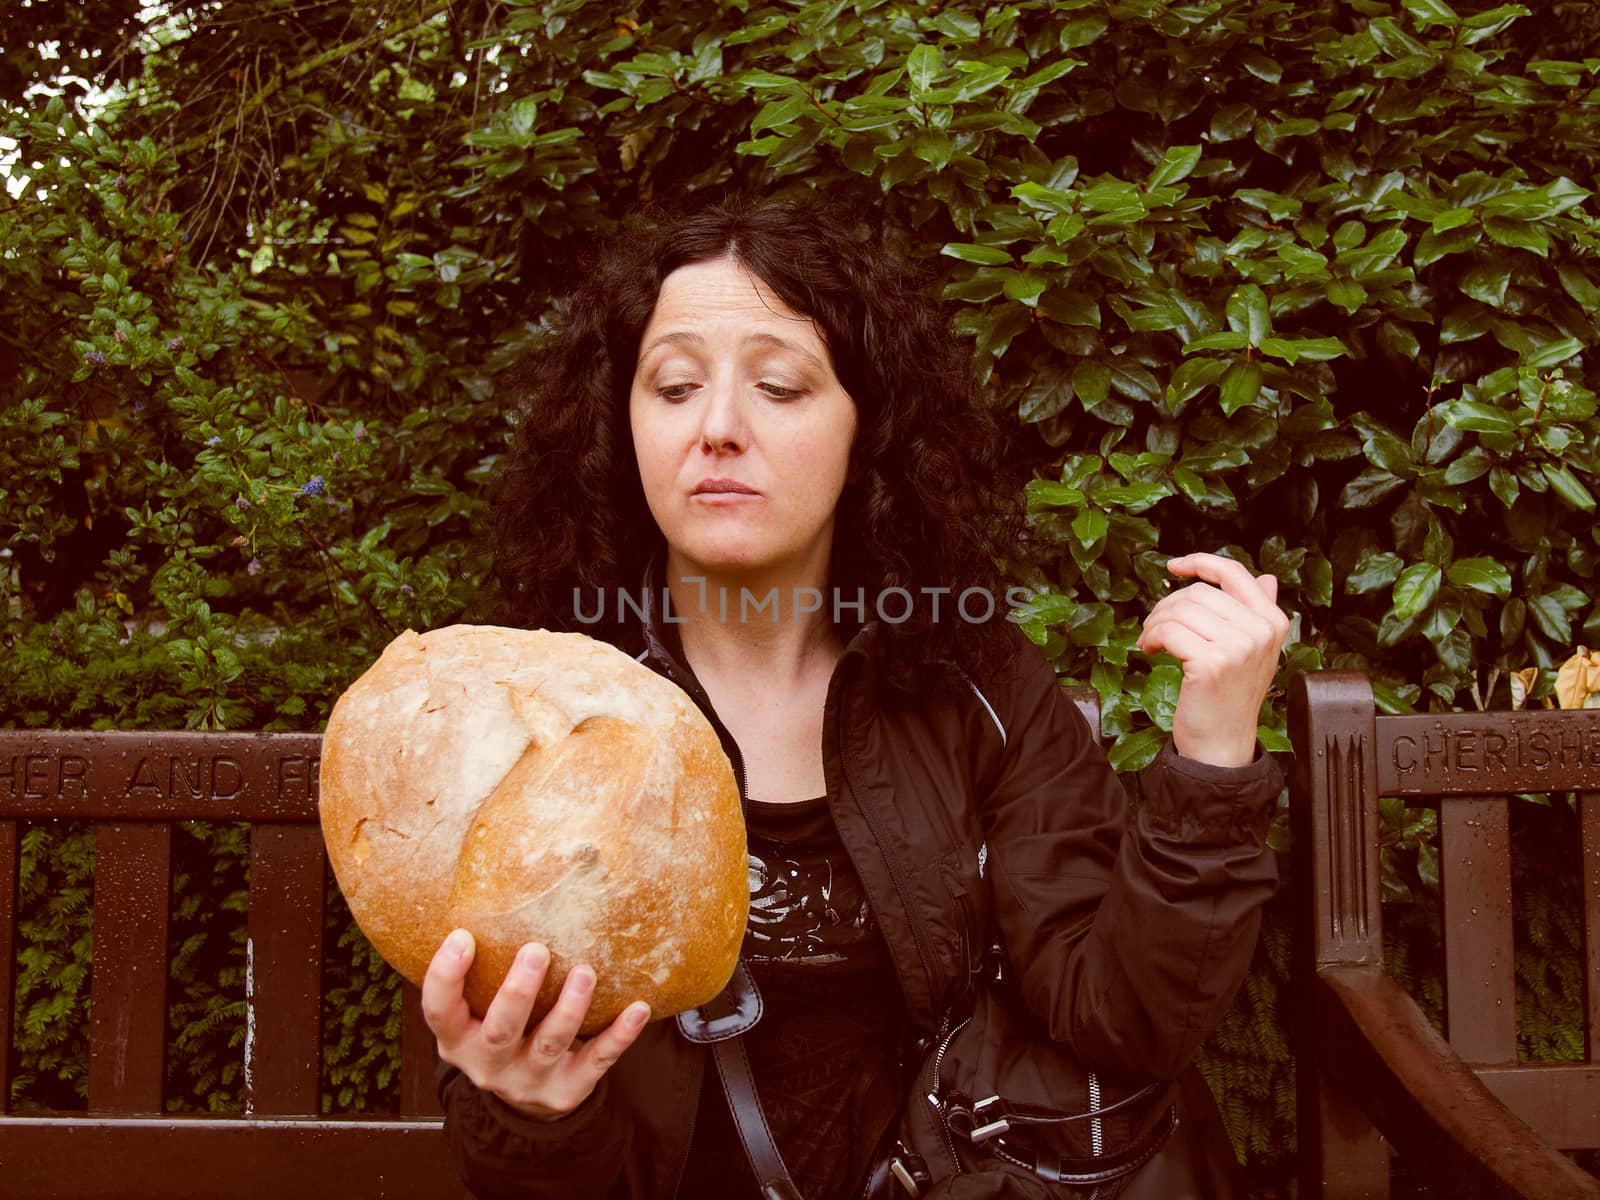 Portrait of pretty young brunette looking at huge bread in hamletic pose - To eat or not to eat